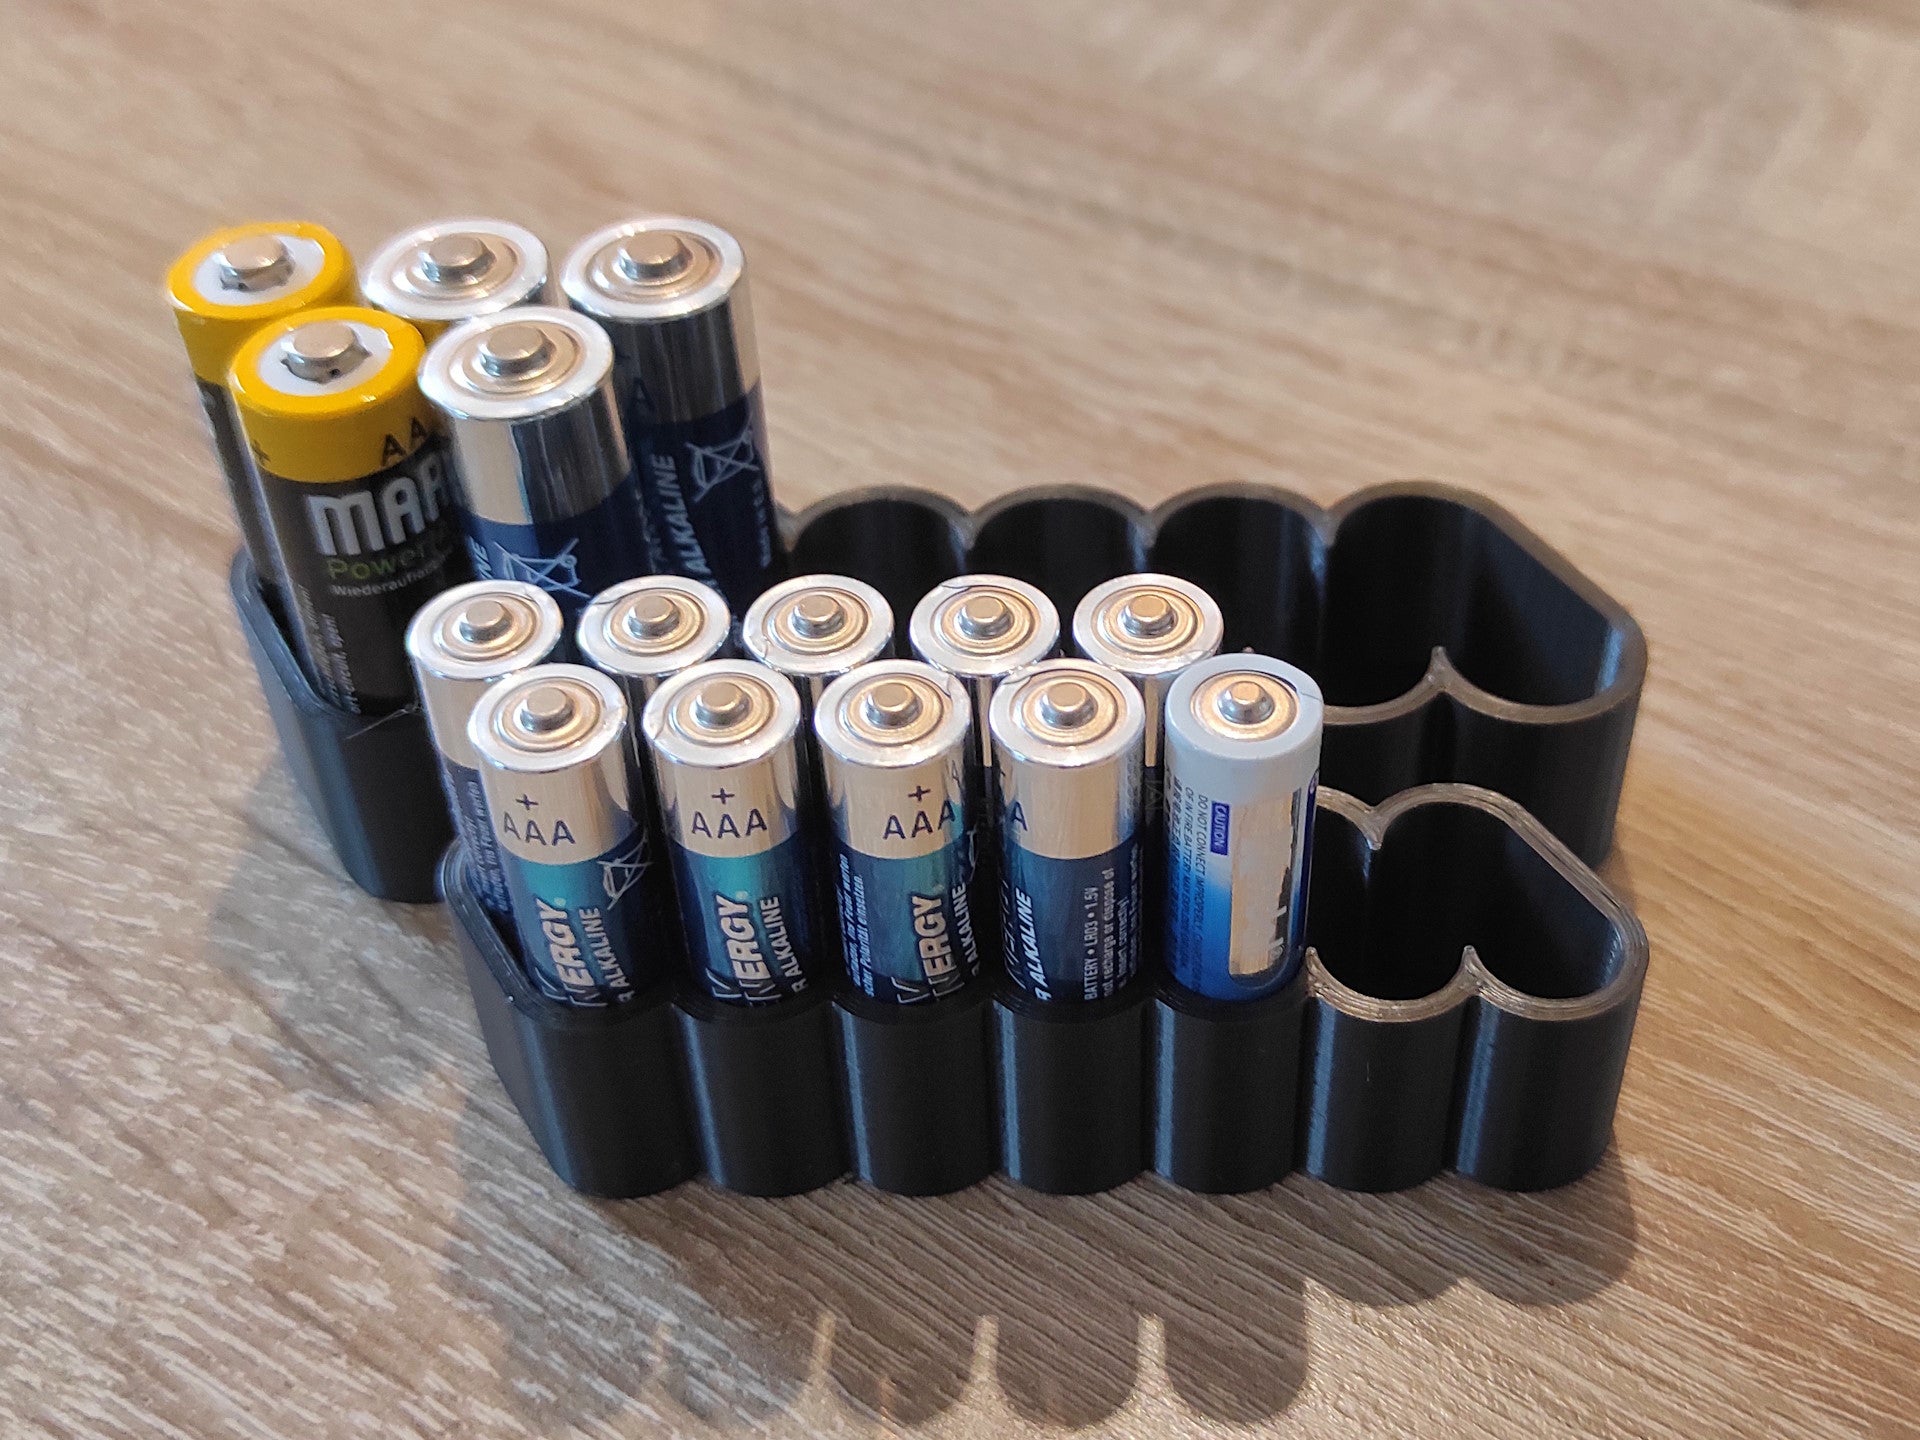 Battery holder for AA and AAA batteries